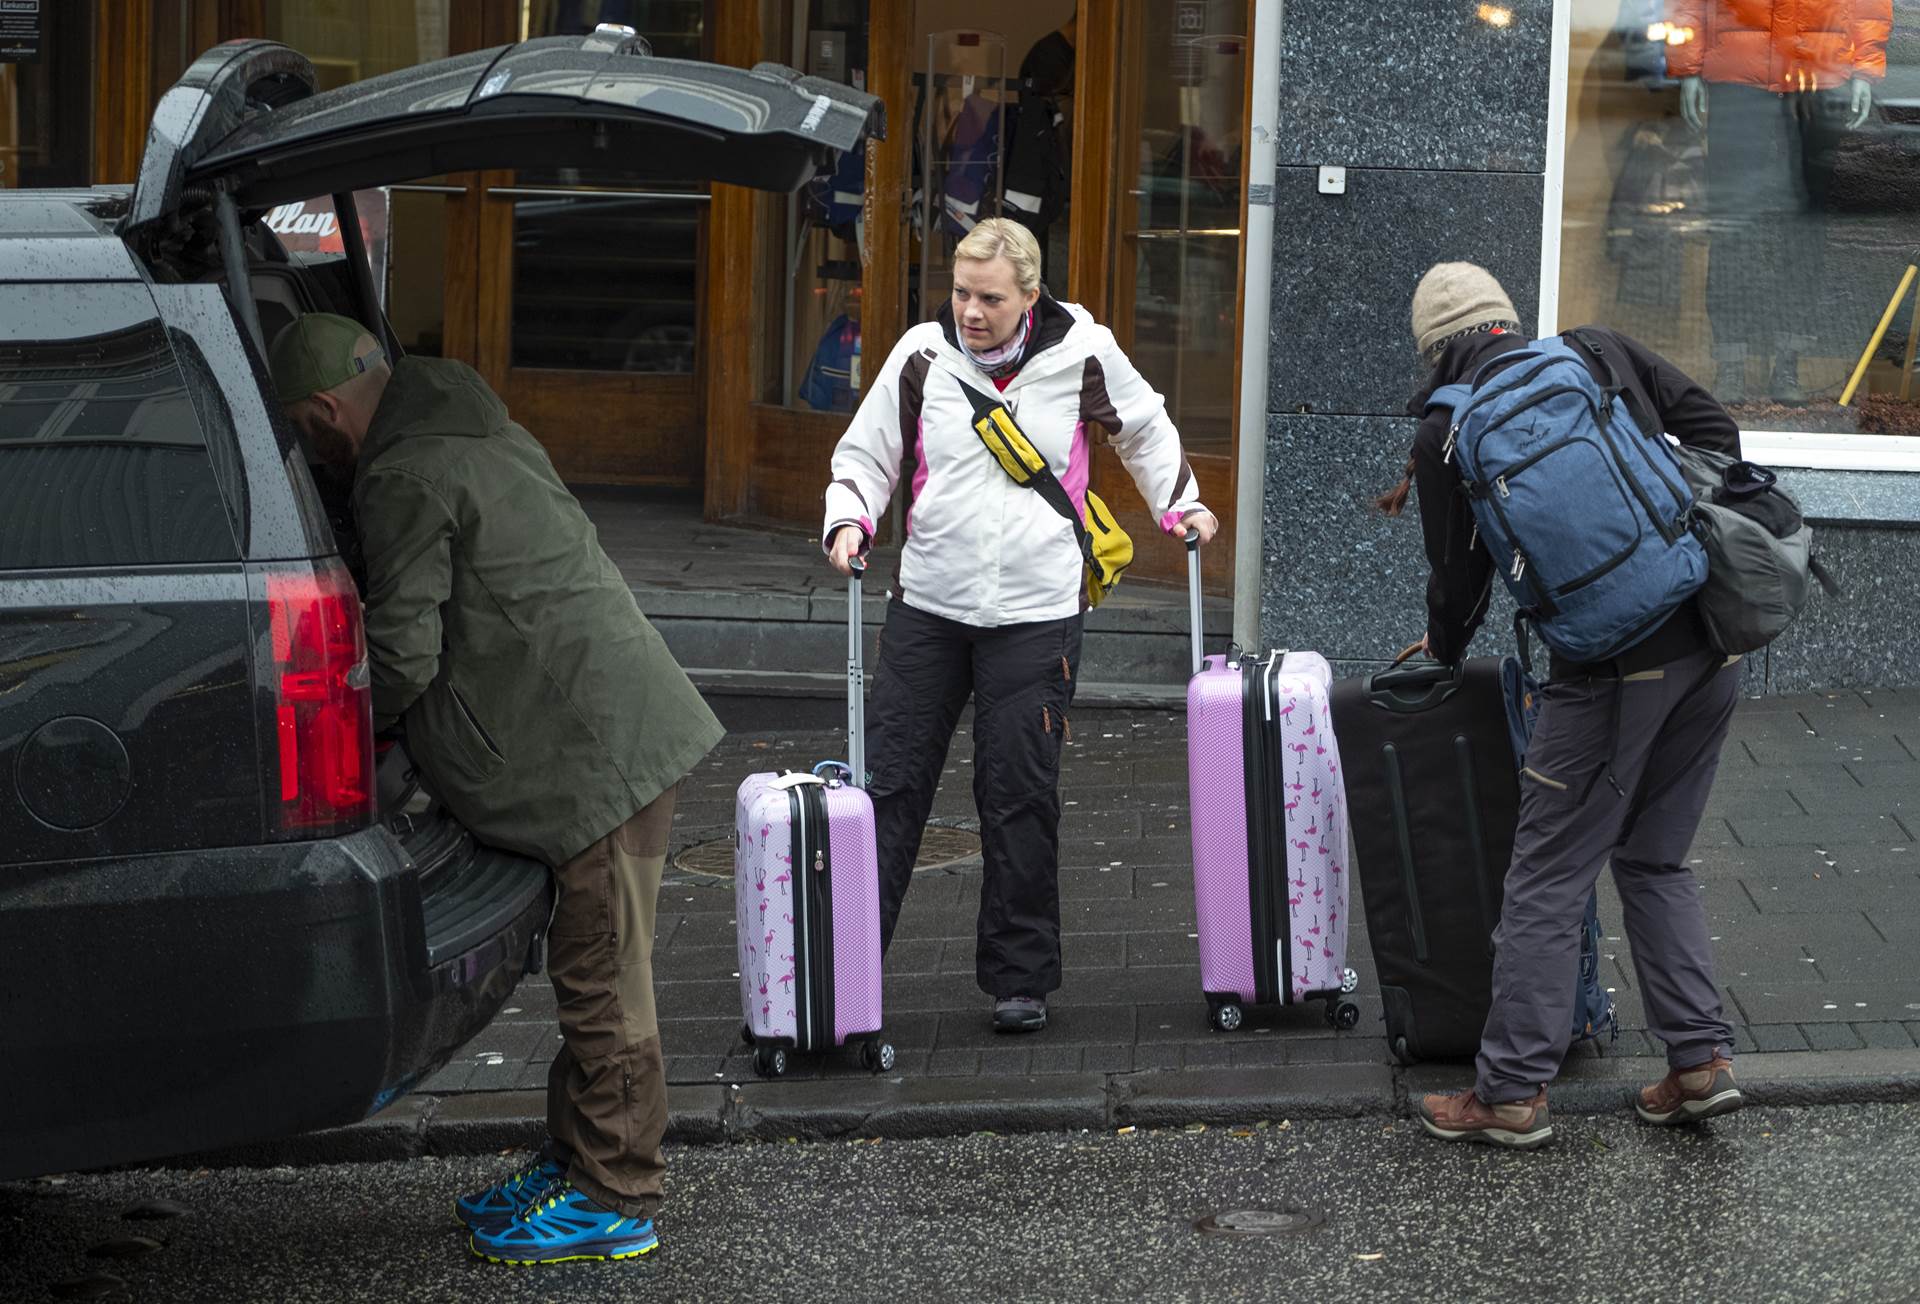 Residents of fourteen non-EEA and Schengen states allowed to visit Iceland - mynd